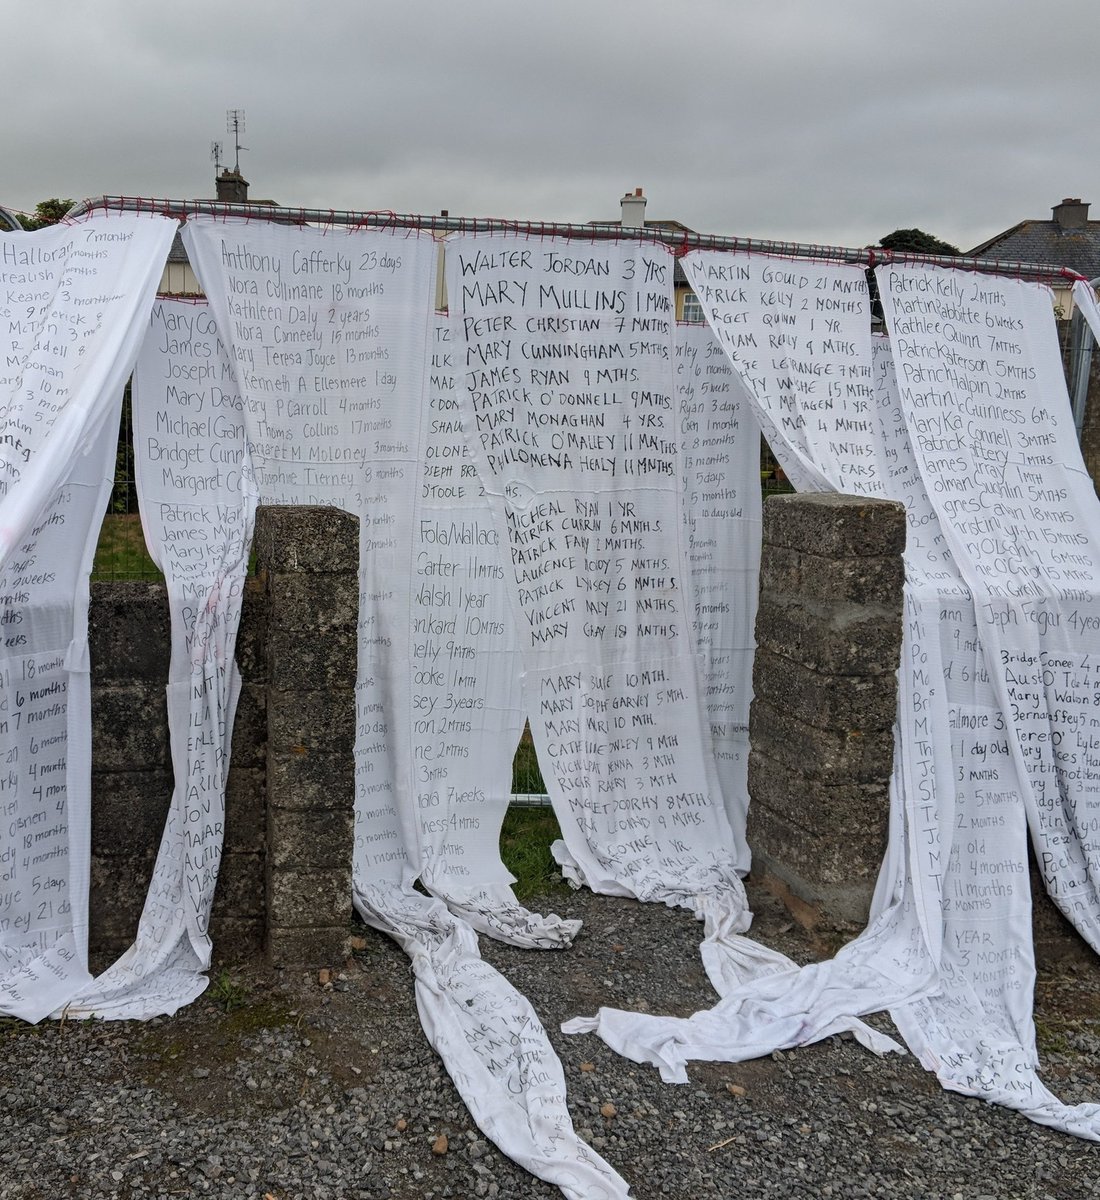 I went to Tuam the year results of the test excavation were made public. The remains of children are still there in sewage chambers on the grounds of the "home". The state already promised they would exhume and identify them. But the grass has grown back. Families still wait.